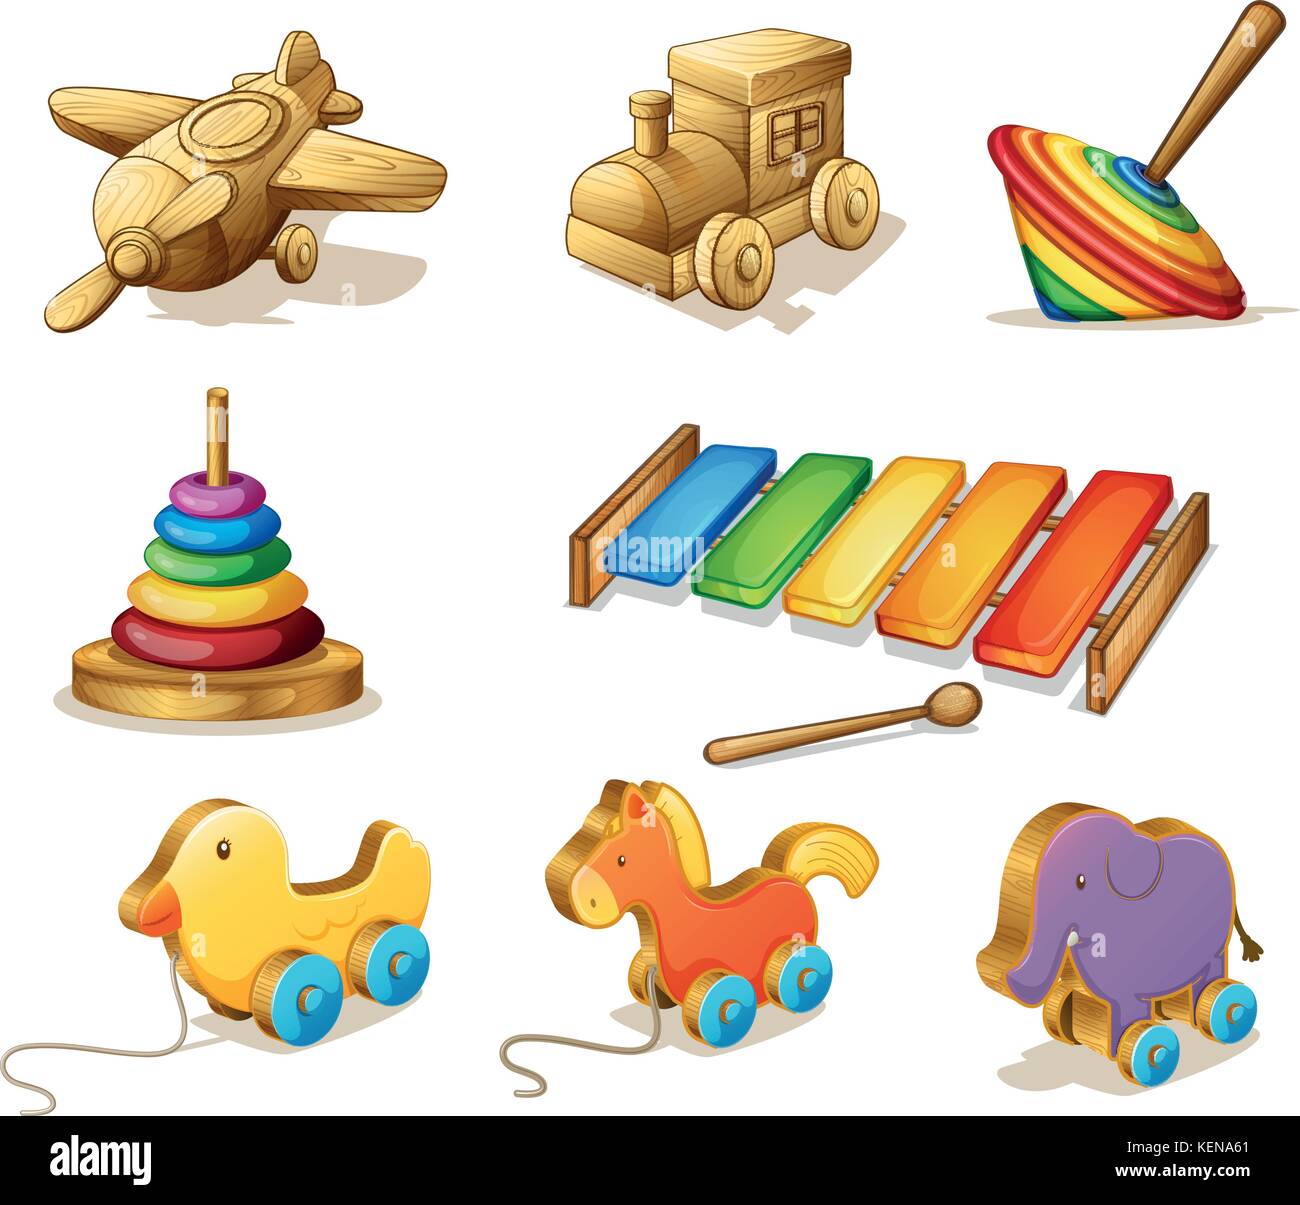 Illustration of many different wooden toys Stock Vector